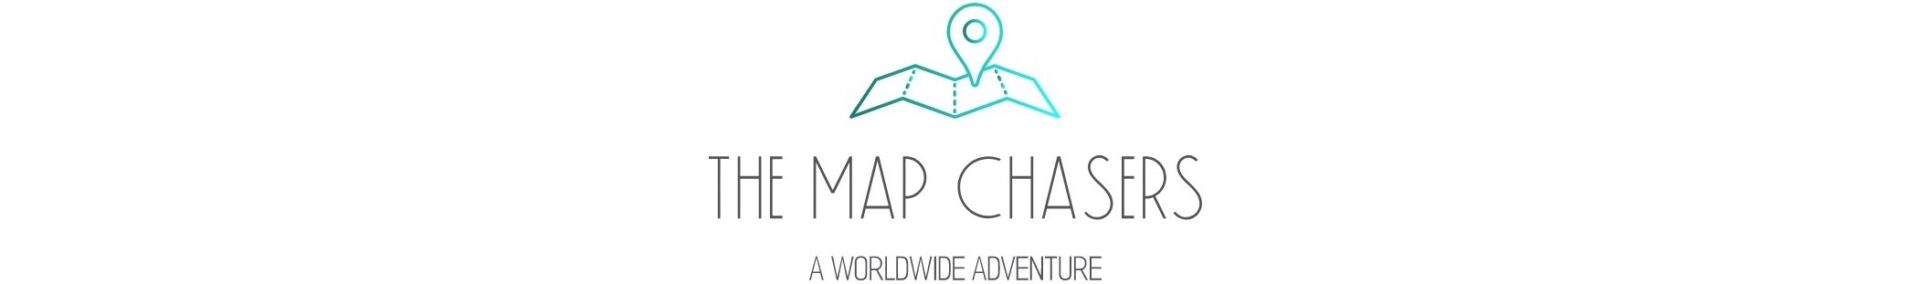 The Map Chasers - a worldwide adventure